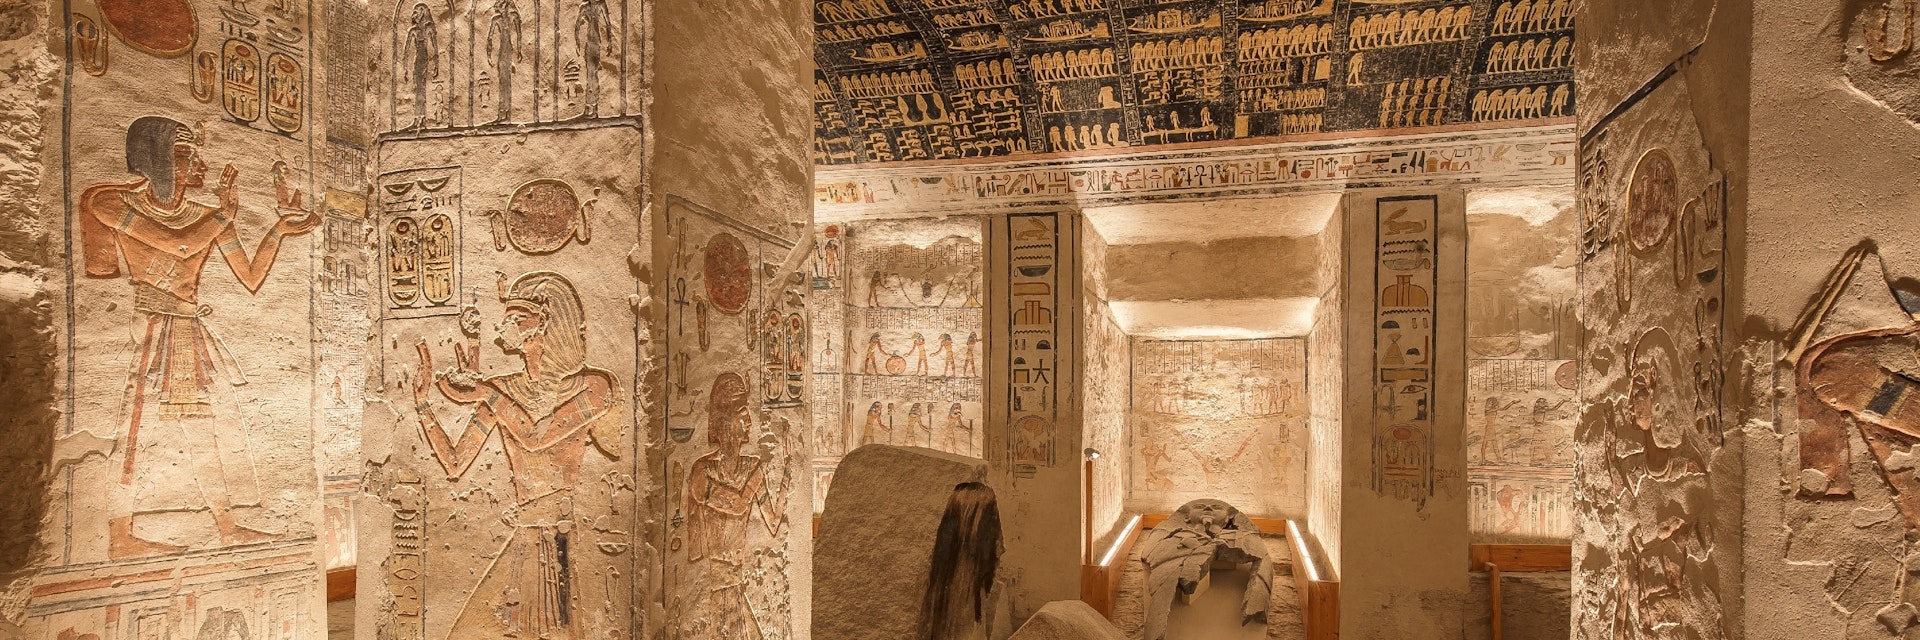 Ramesses VI tomb in Valley of the Kings, Luxor, Egypt.